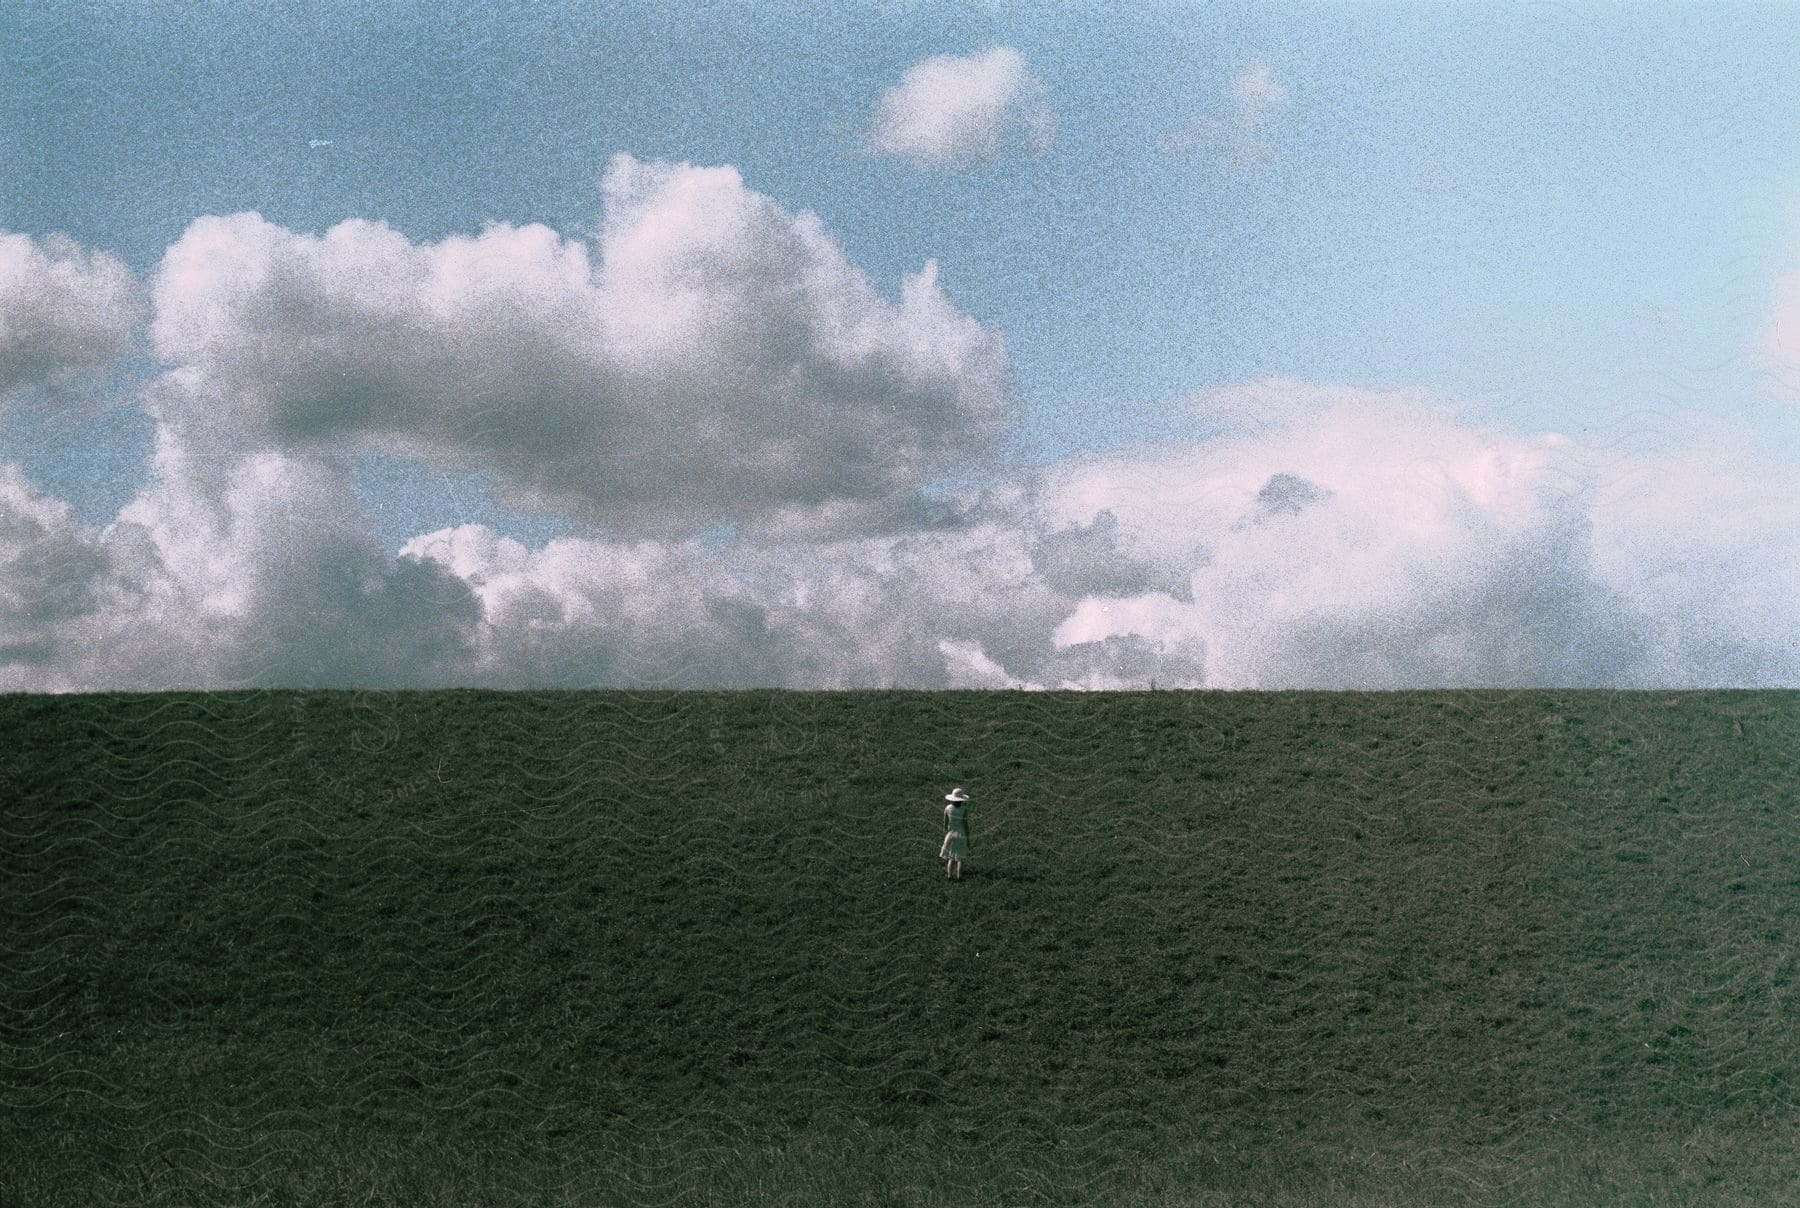 A distant woman wearing a sun hat and white dress walks uphill in a grassy landscape